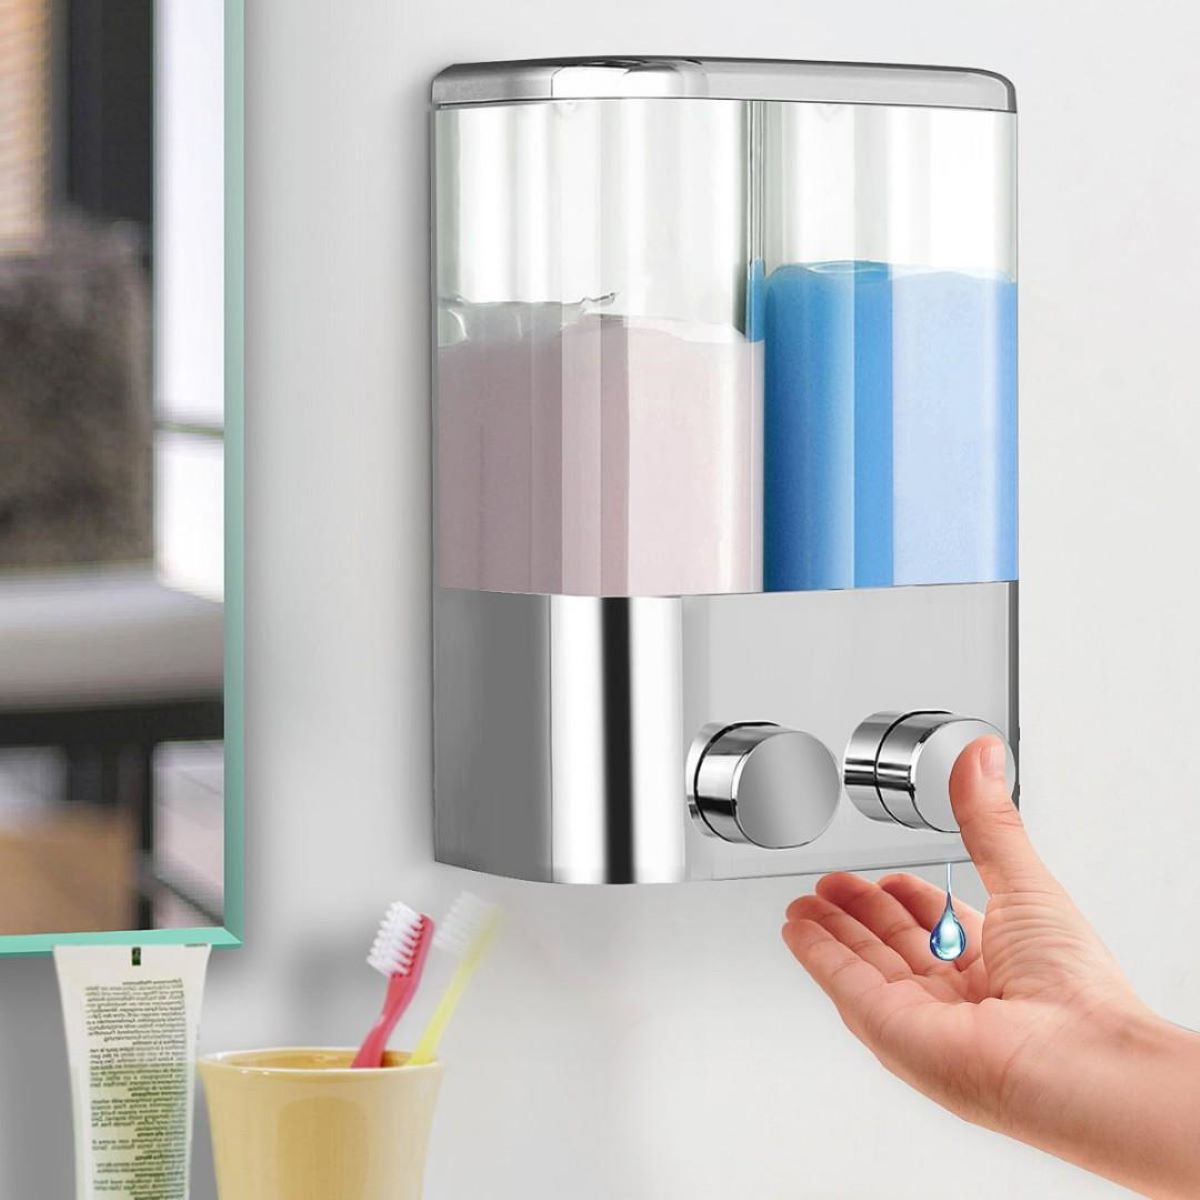 How To Install Soap Dispenser On Wall